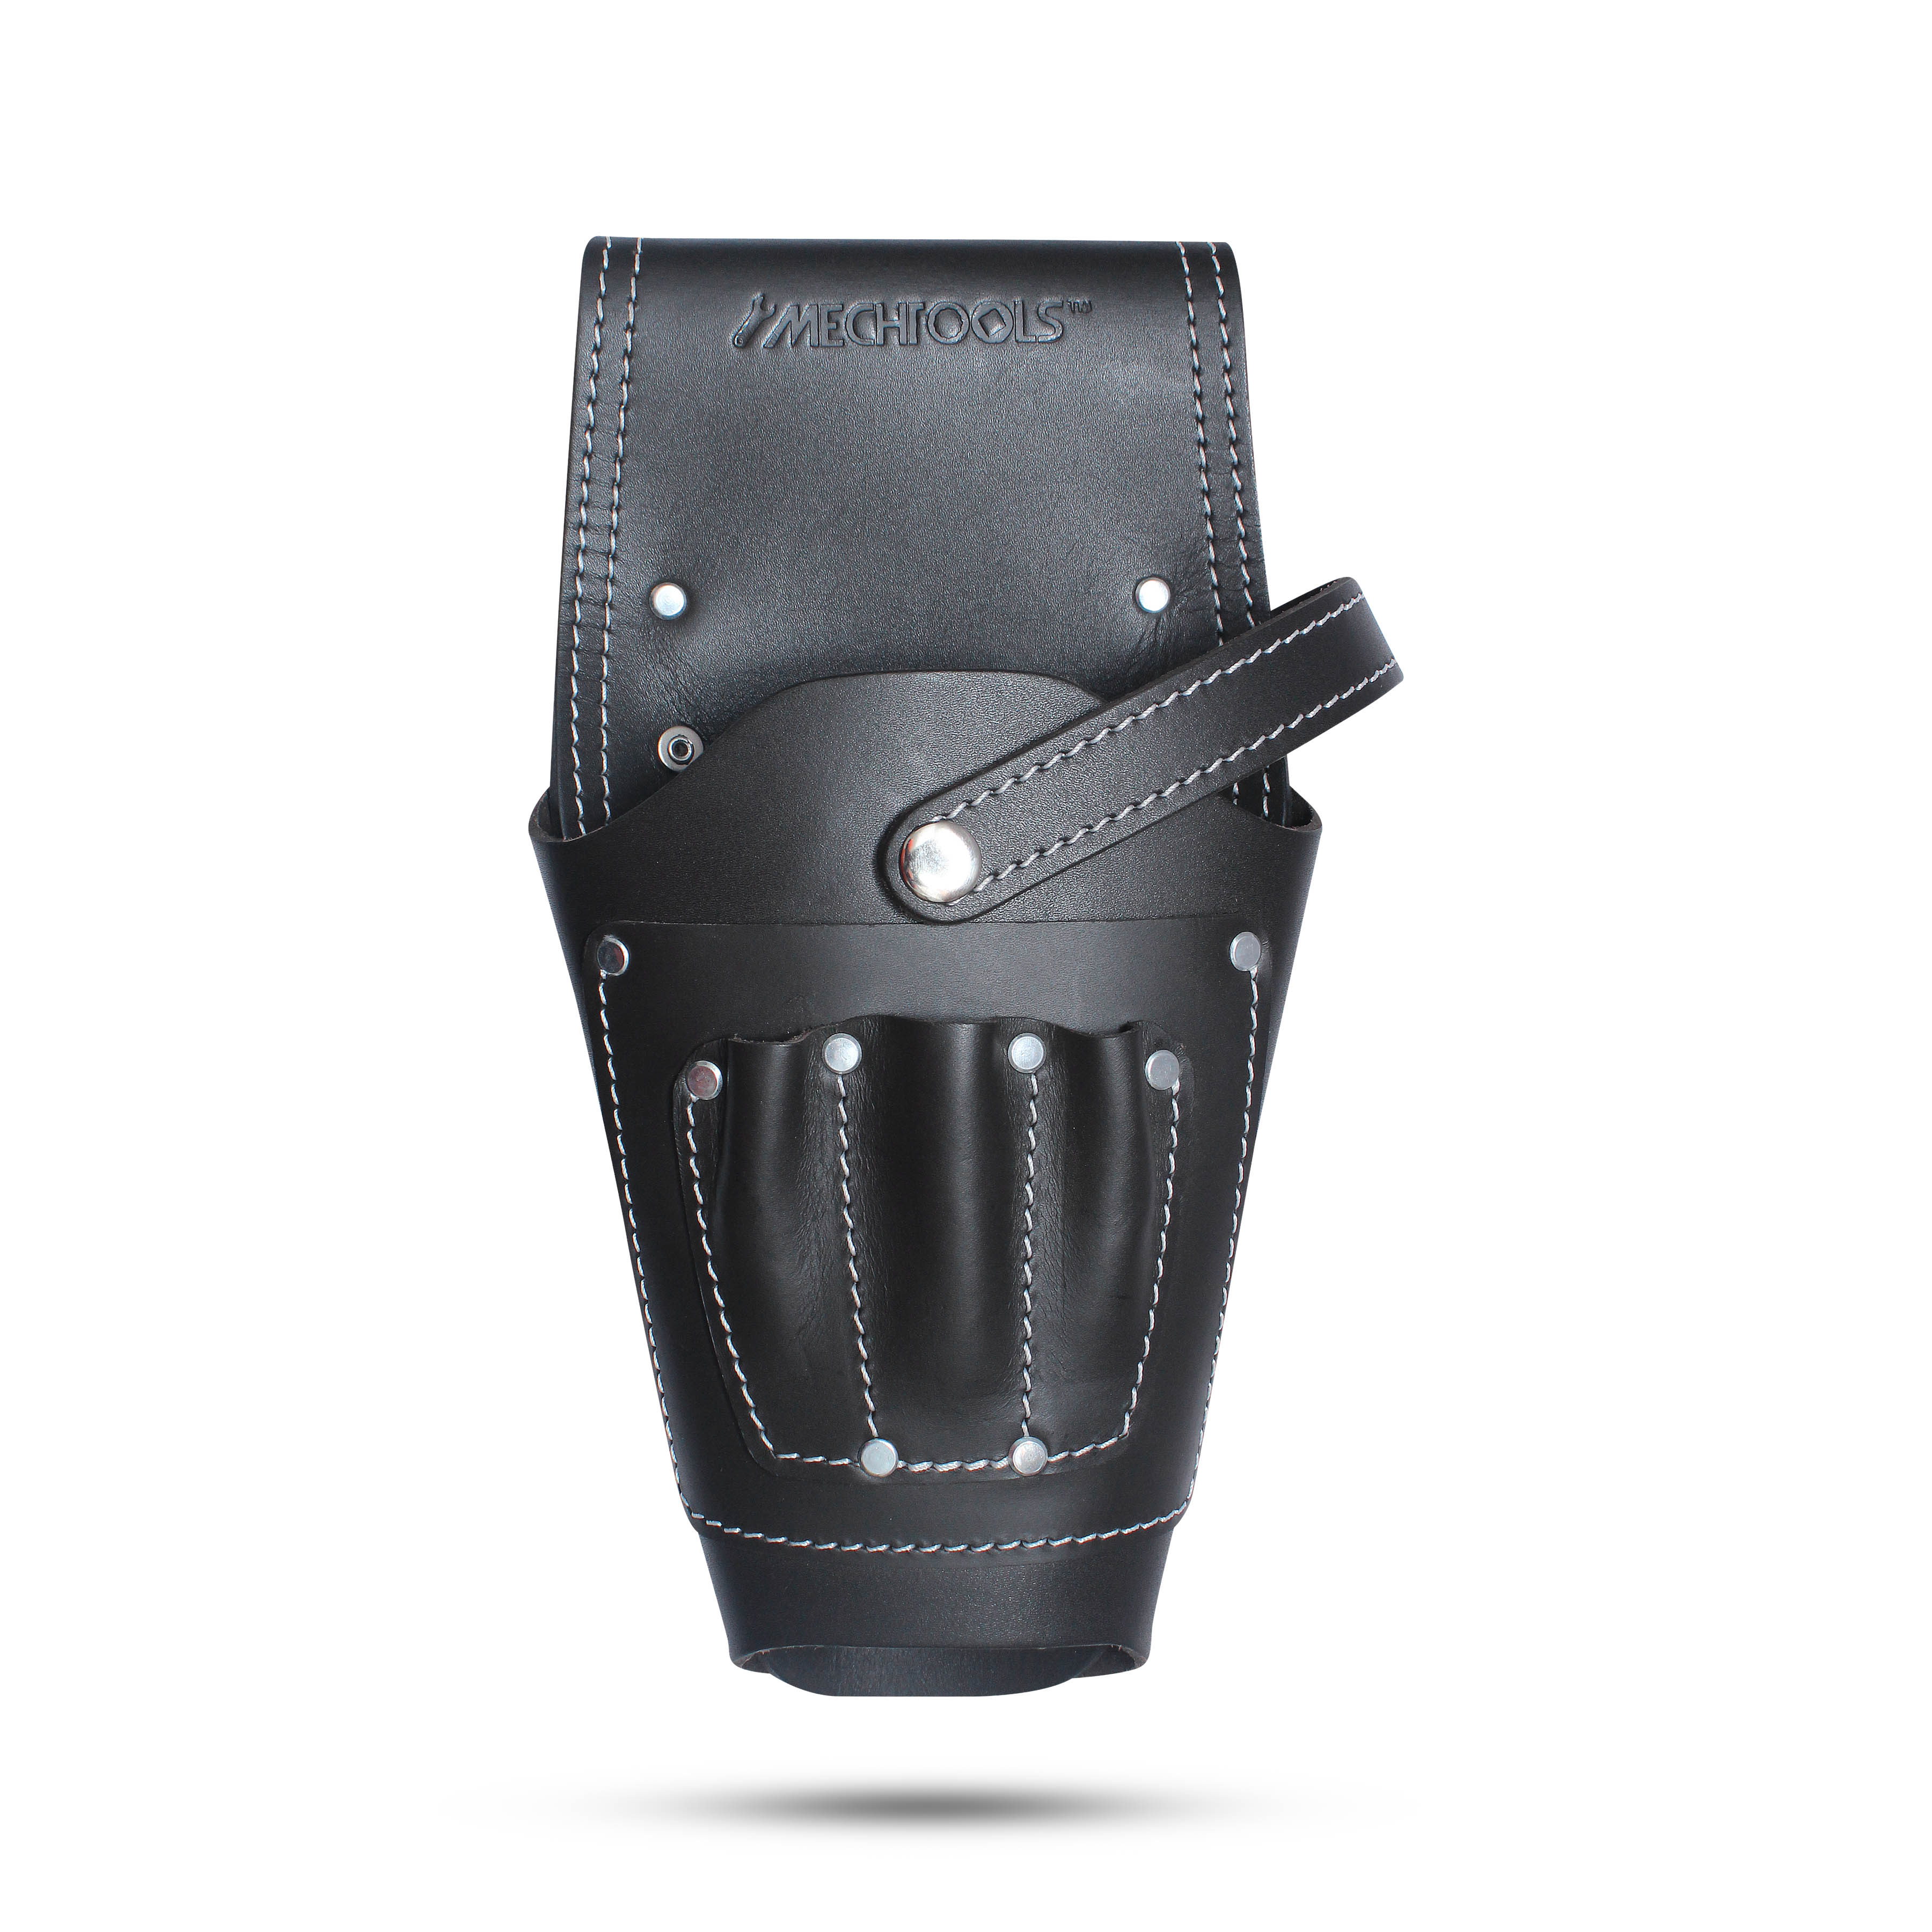 LEATHER DRILL HOLSTER
(1 Pc)
FOR LEFT + RIGHT HANDERS